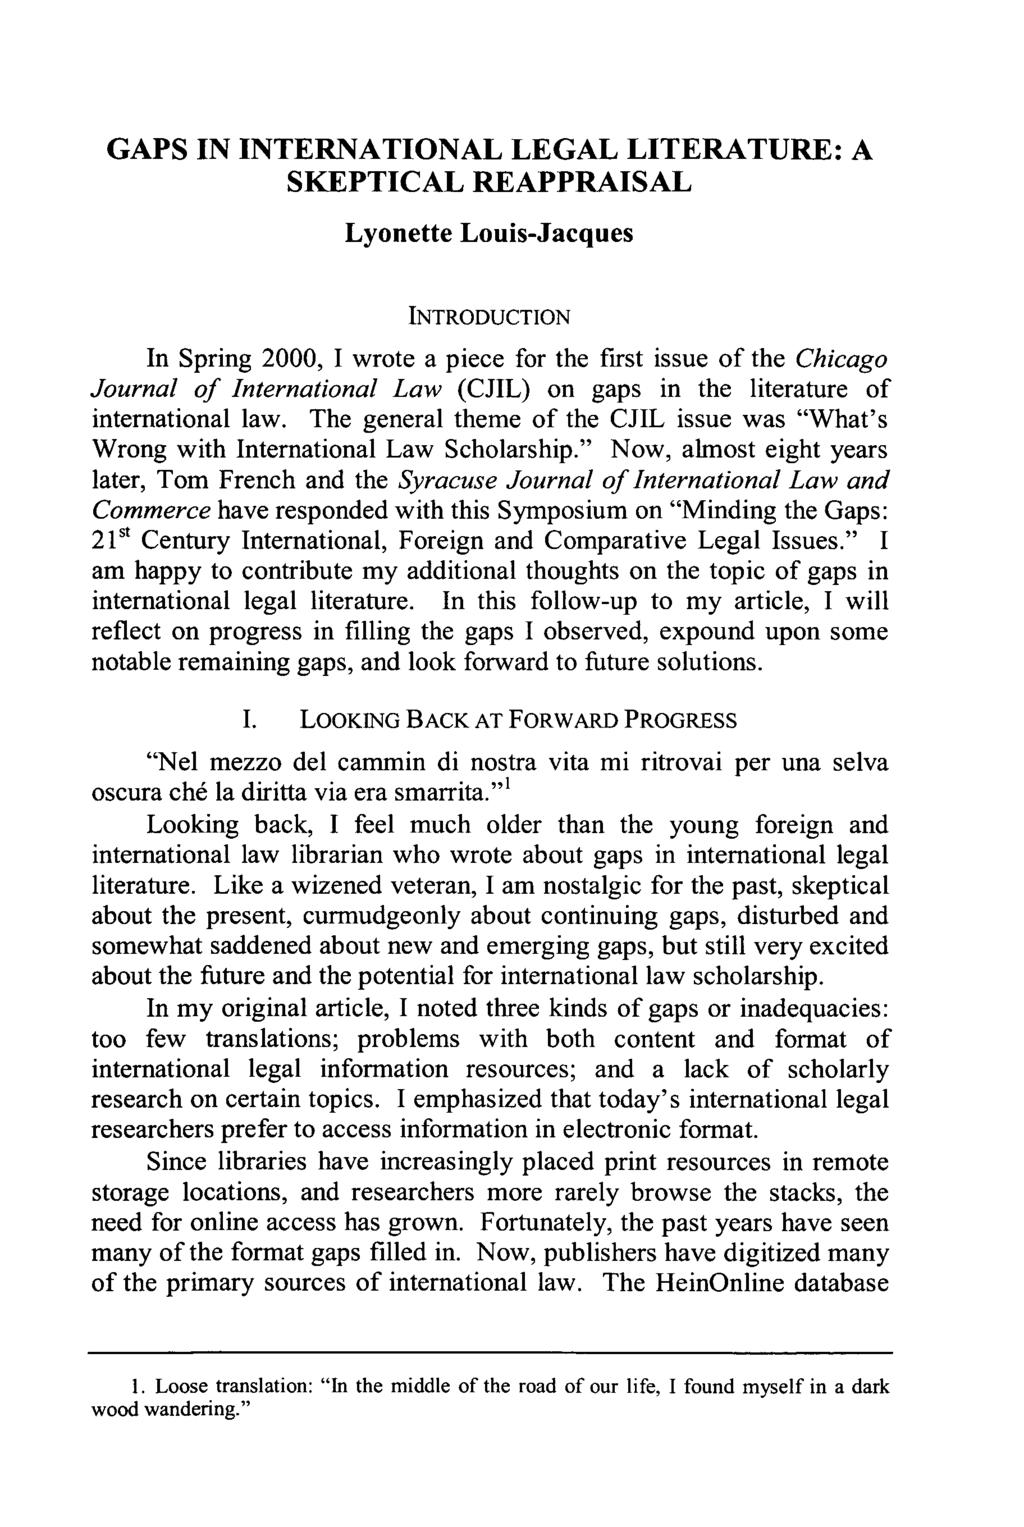 GAPS IN INTERNATIONAL LEGAL LITERATURE: A SKEPTICAL REAPPRAISAL Lyonette Louis-Jacques INTRODUCTION In Spring 2000, I wrote a piece for the first issue of the Chicago Journal of International Law